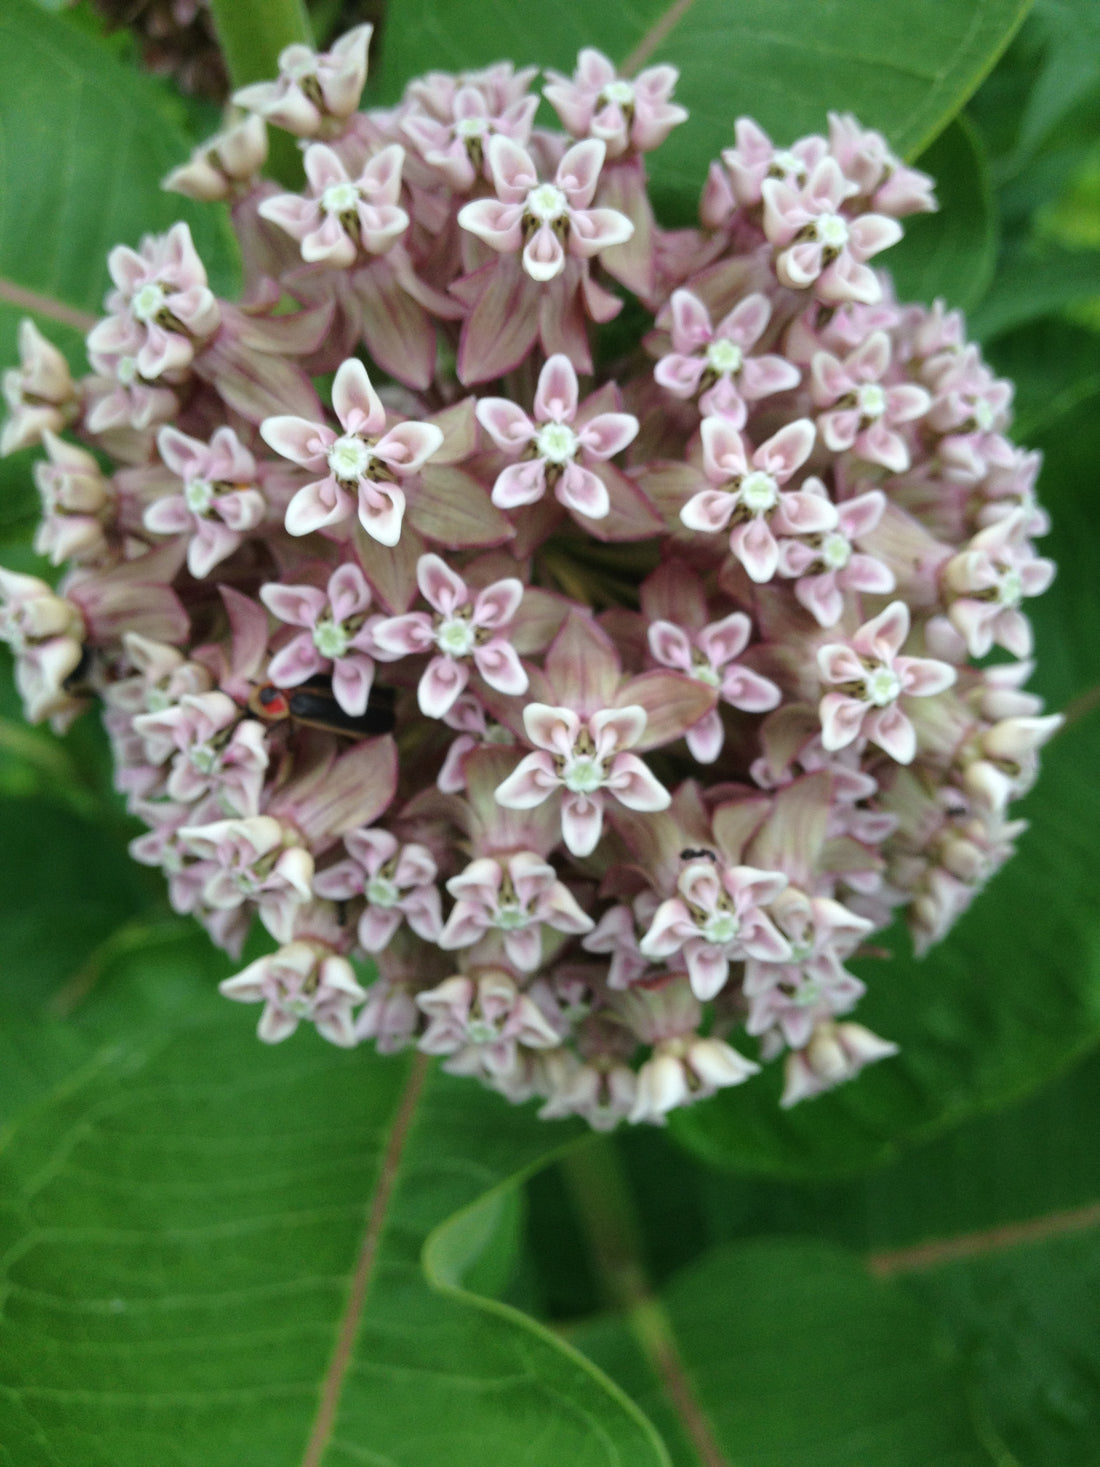 Plant Milkweed in the Fall?